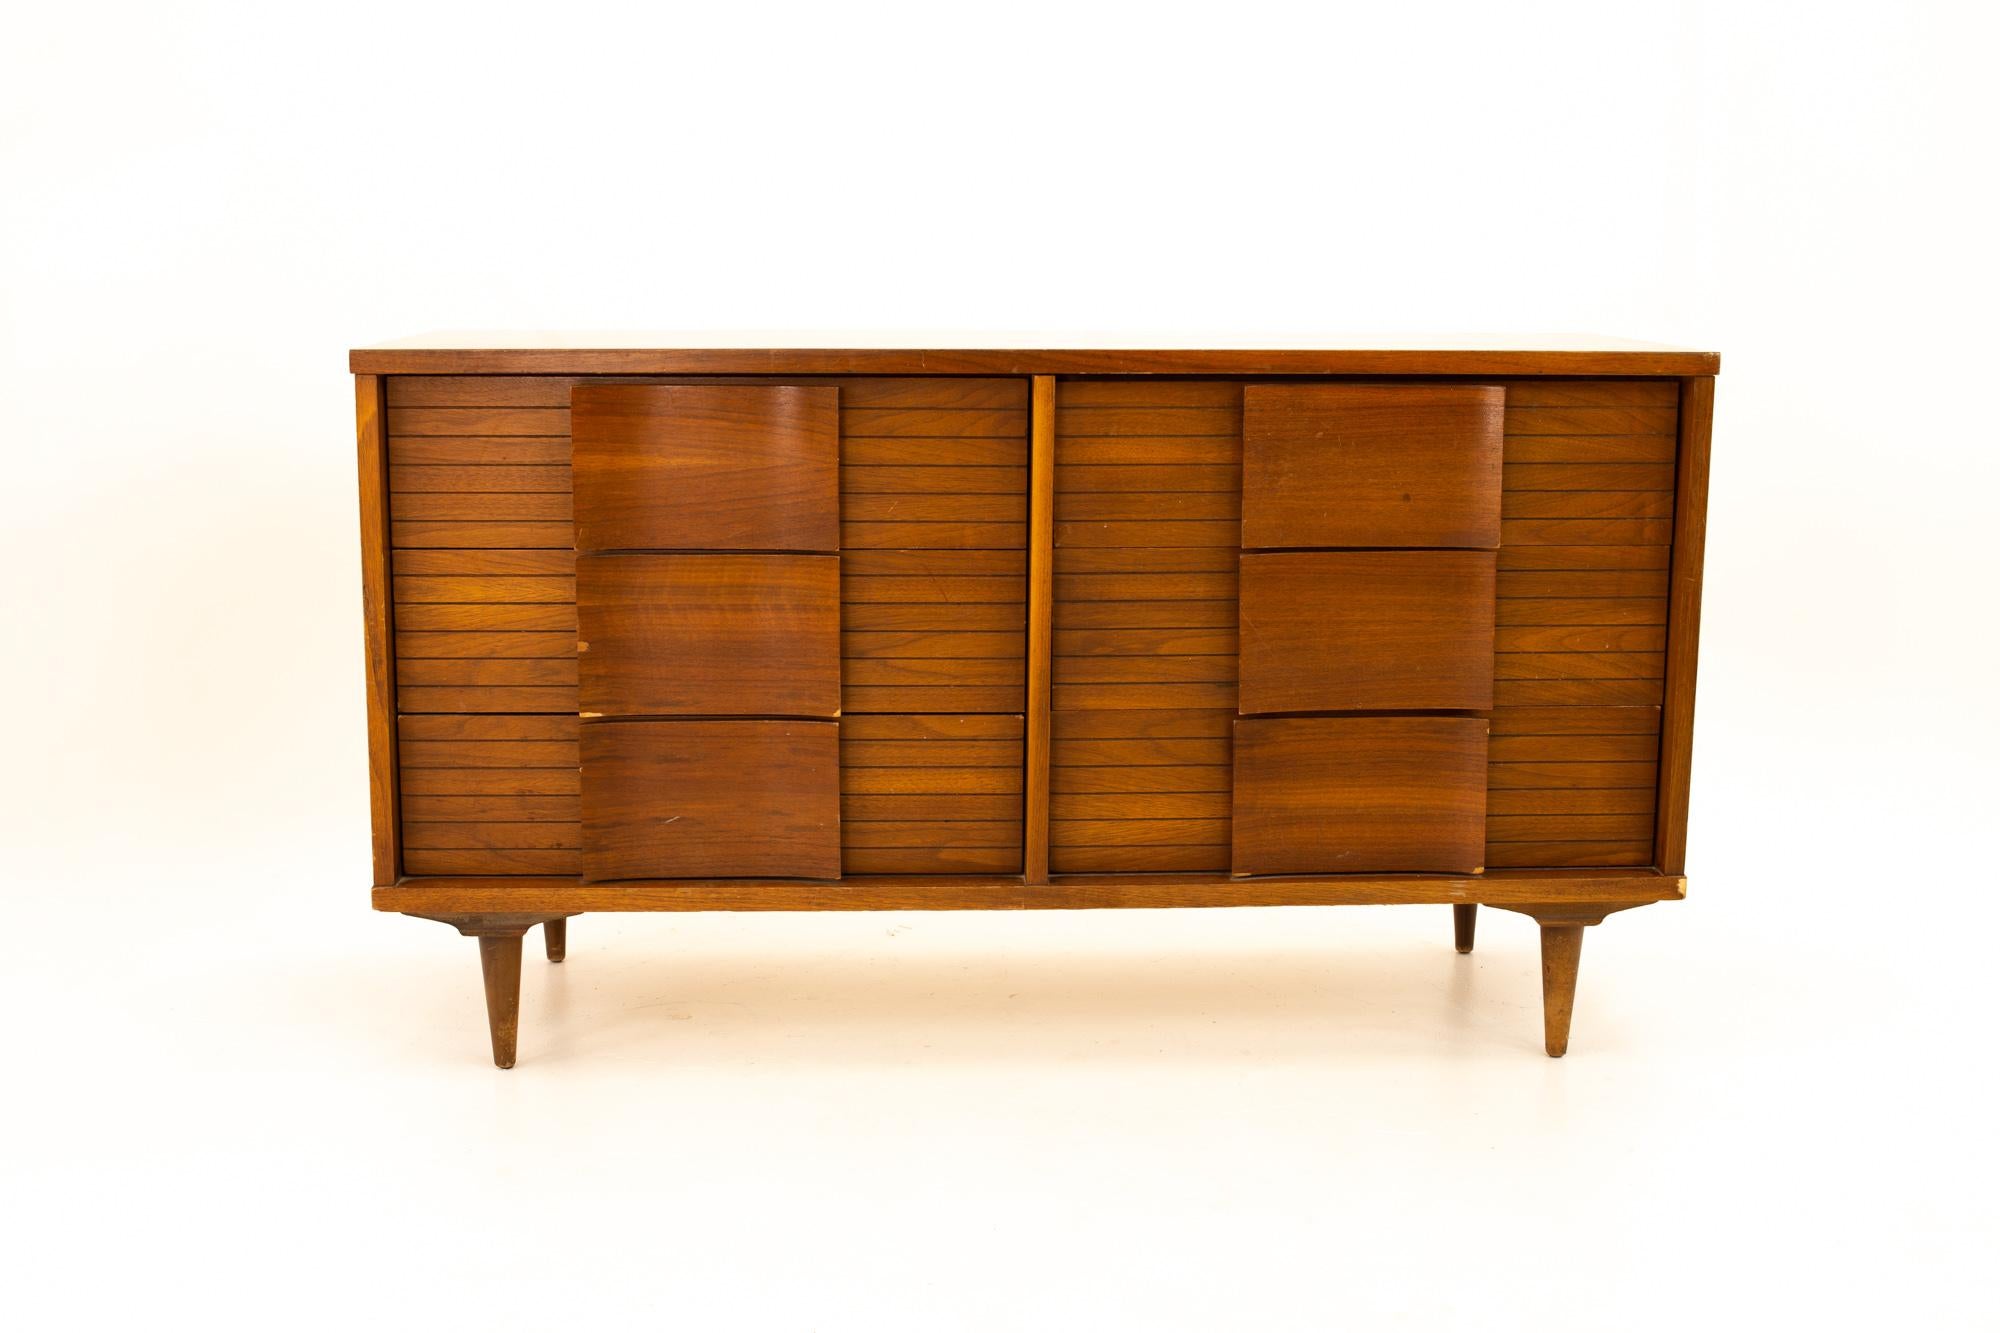 Johnson Carper mid century Formica top 6-drawer walnut lowboy dresser
Dresser measures: 54 wide x 17.75 deep x 30 high

This price includes getting this piece in what we call restored vintage condition. That means the piece is permanently fixed